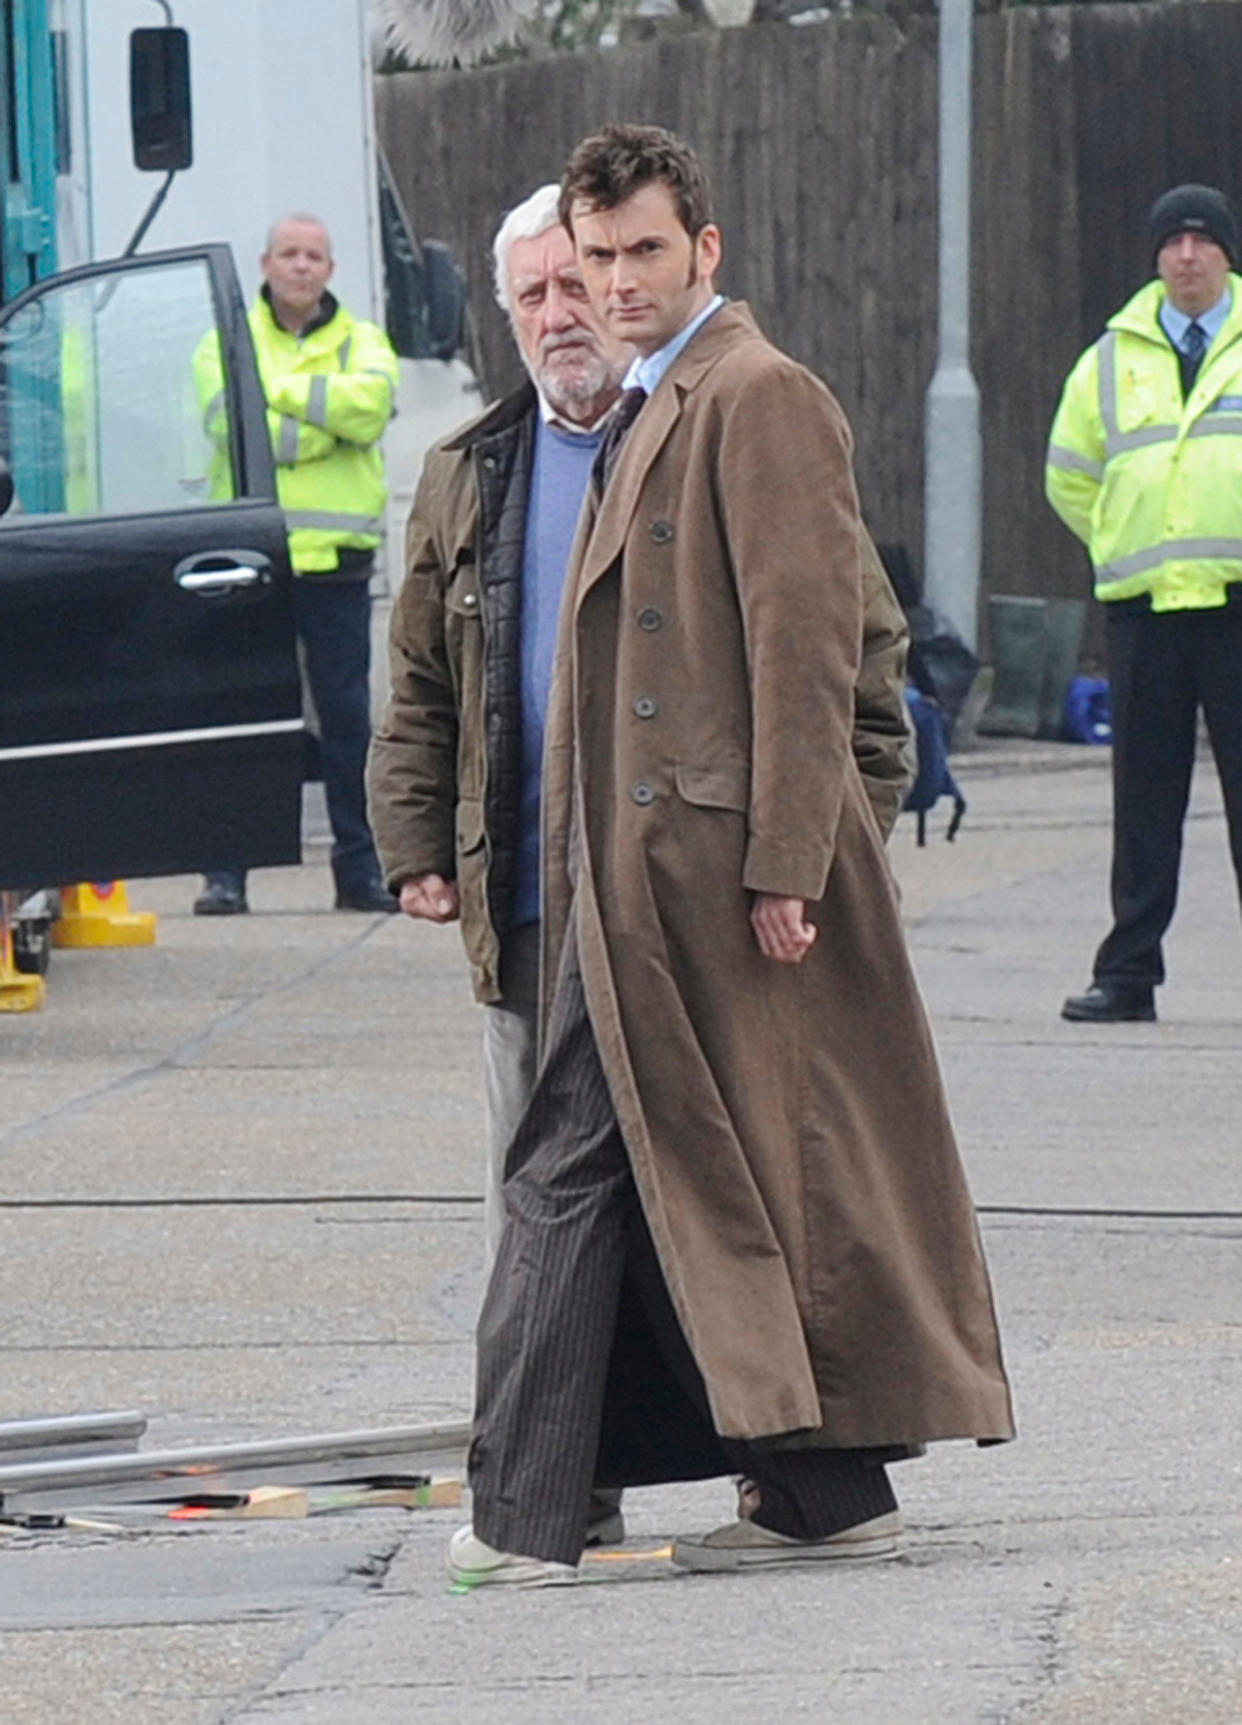 David Tennant and Bernard Cribbins filming on the set of the BBC's 'Doctor Who' Cardiff, Wales - 06.04.09